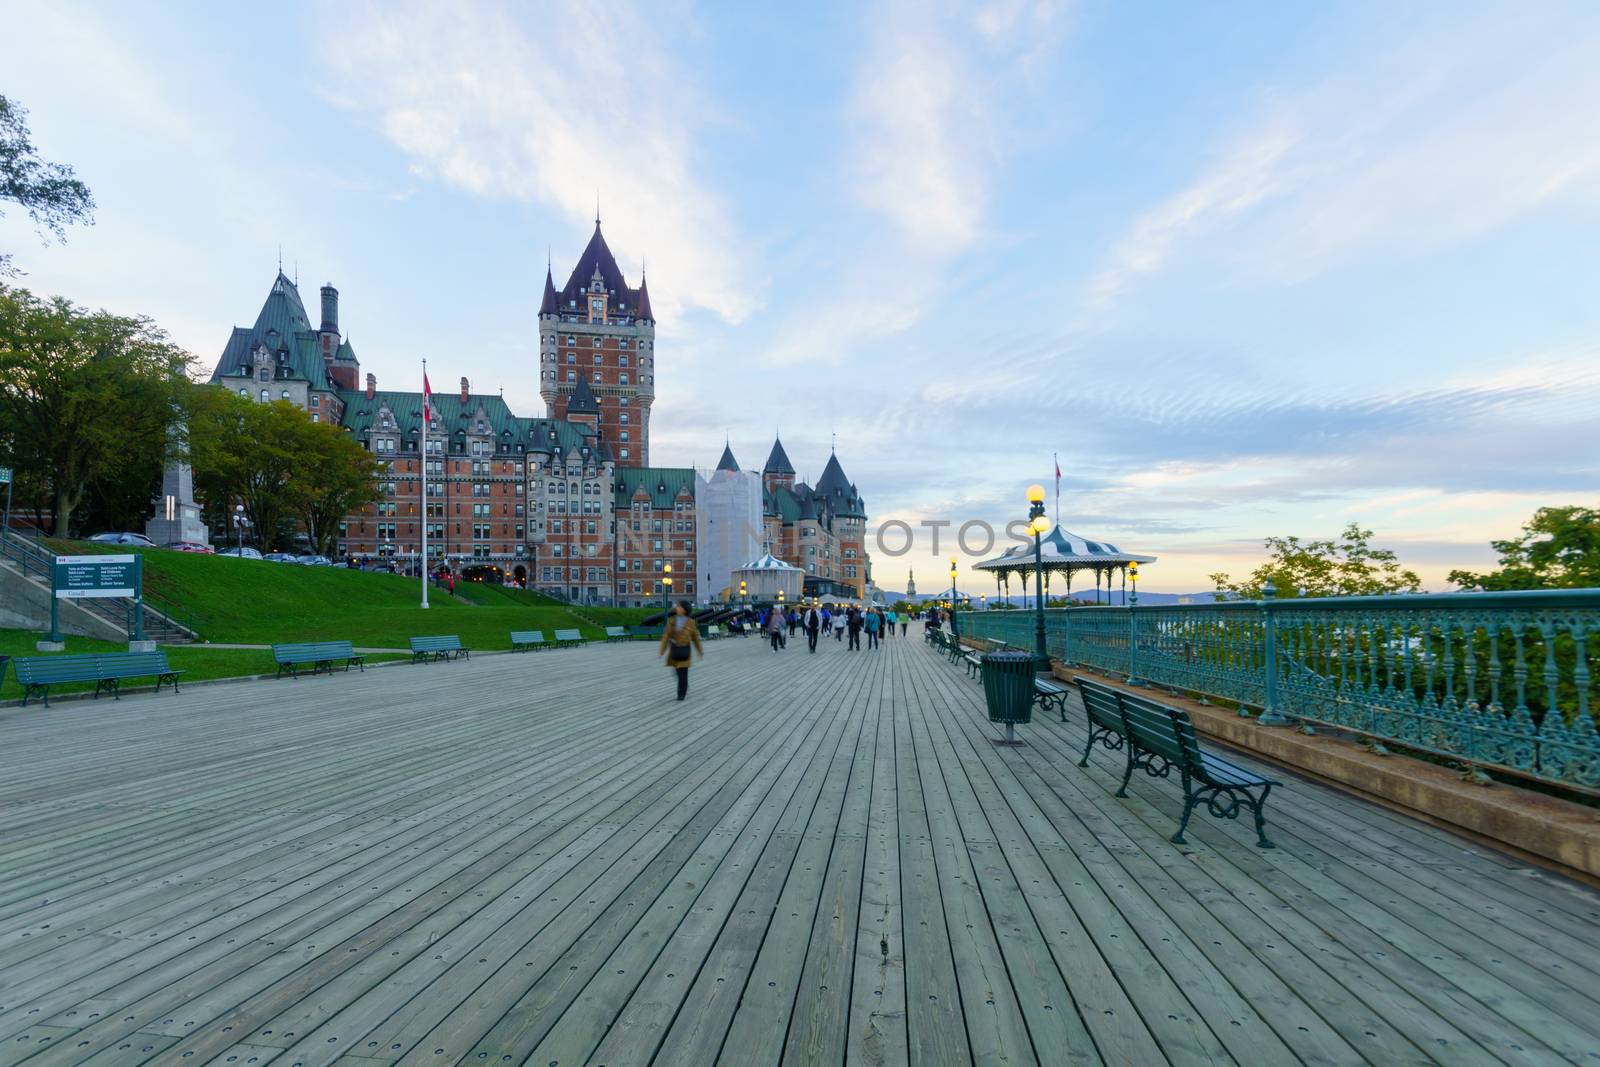 Sunset scene of  Dufferin Terrace and Chateau Frontenac, in Queb by RnDmS